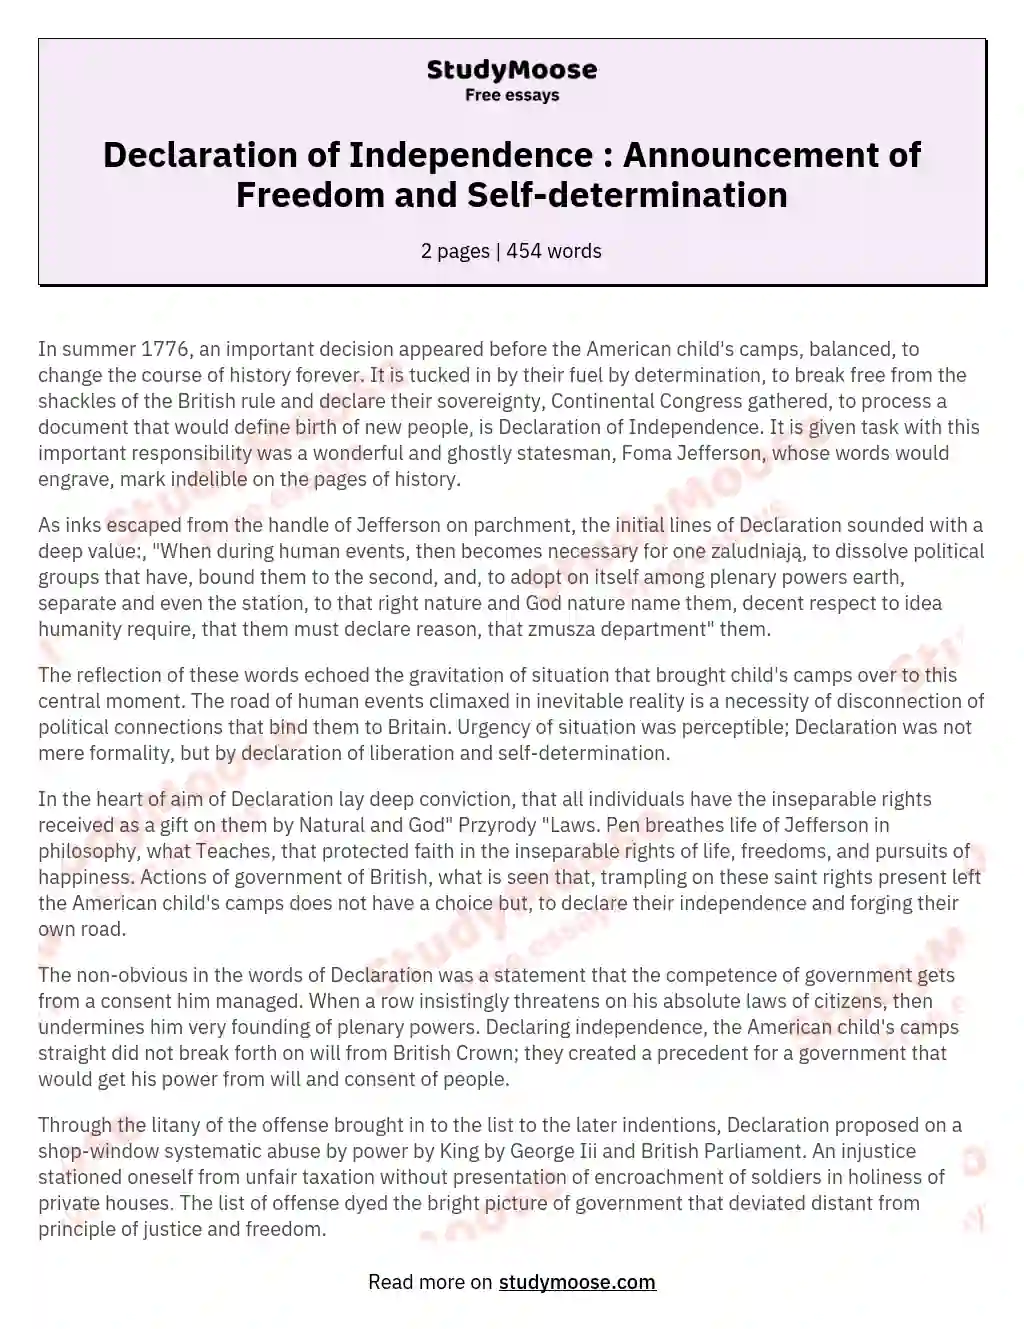 Declaration of Independence : Announcement of Freedom and Self-determination essay